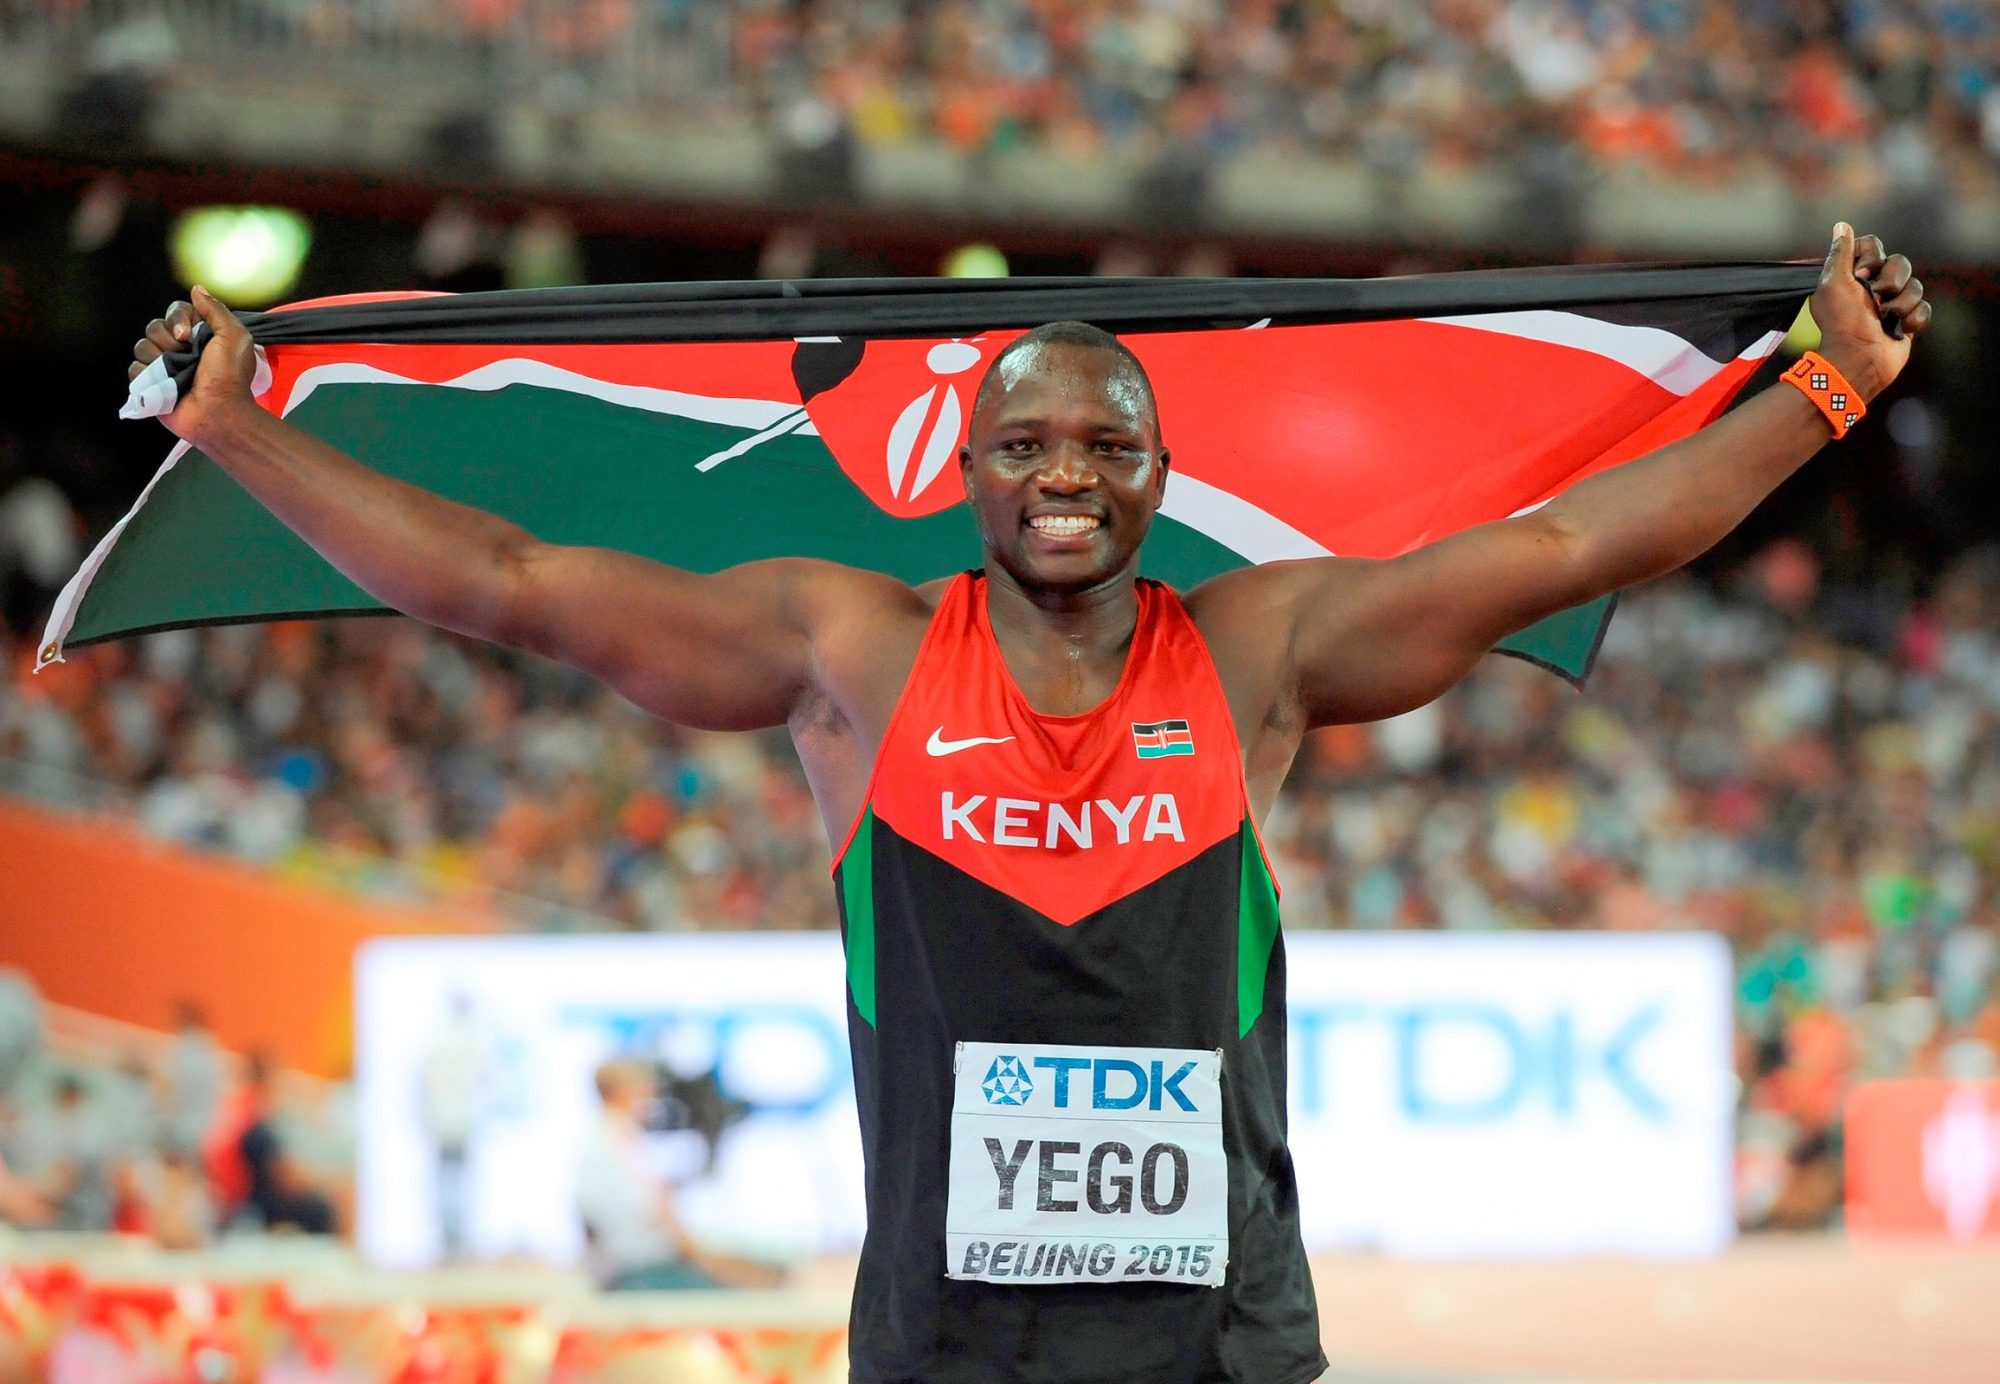 Julius Yego, the 2015 world Javelin Throw champion to compete at the Athletix Grand Prix. Photo Credit: Roger Sedres